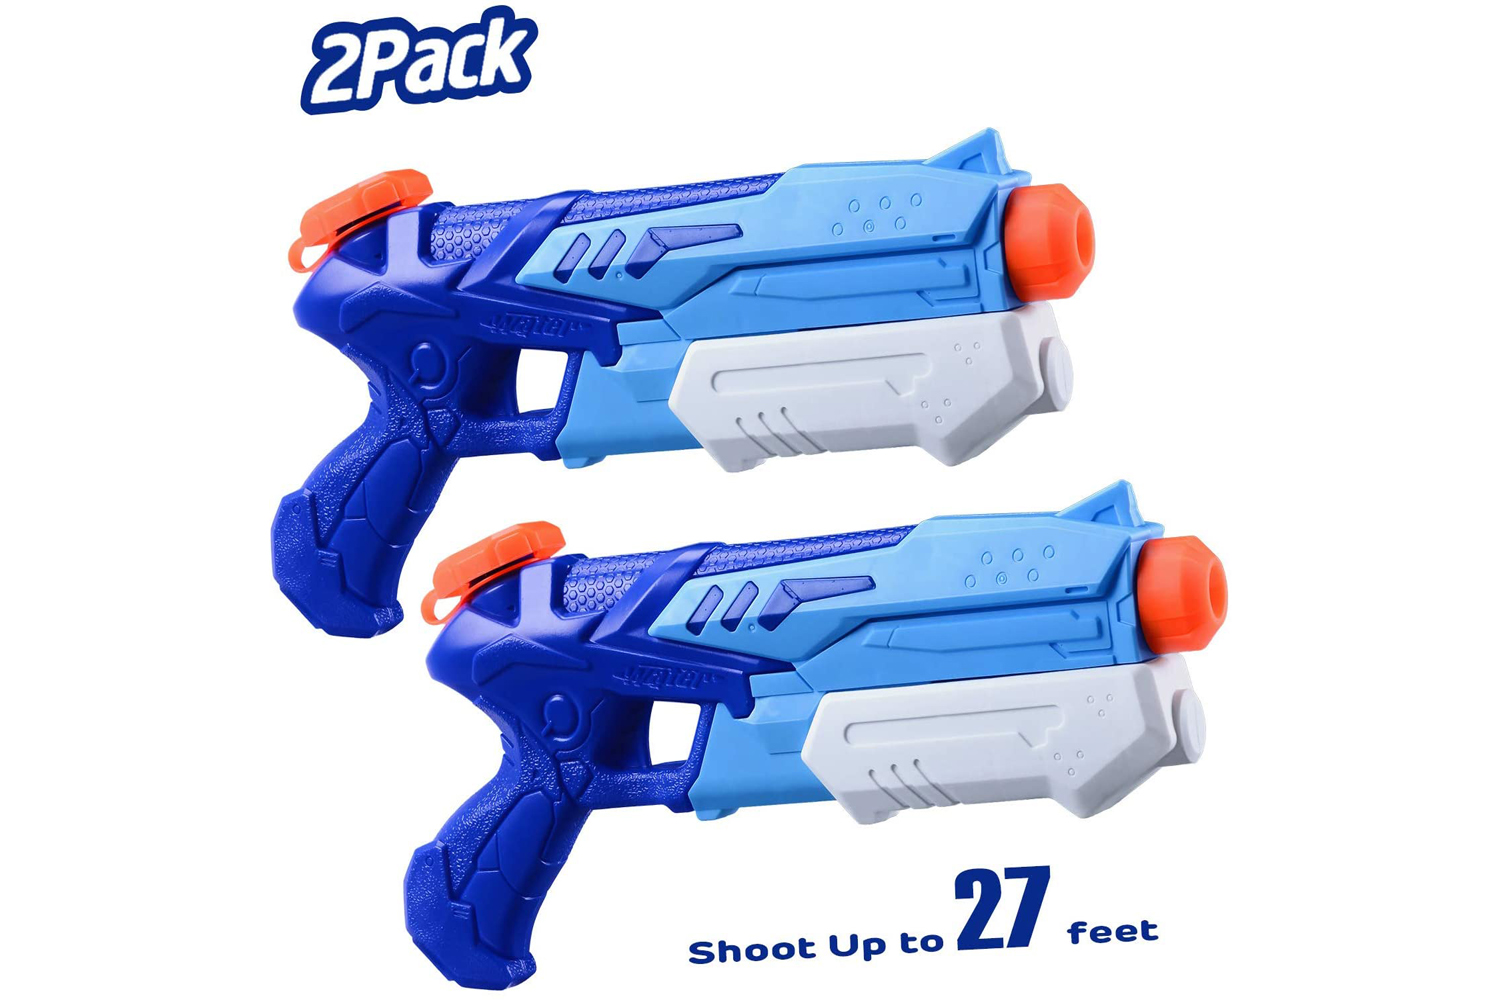 SPYRA TWO Water Gun Review. Probably The Best Water Gun in the